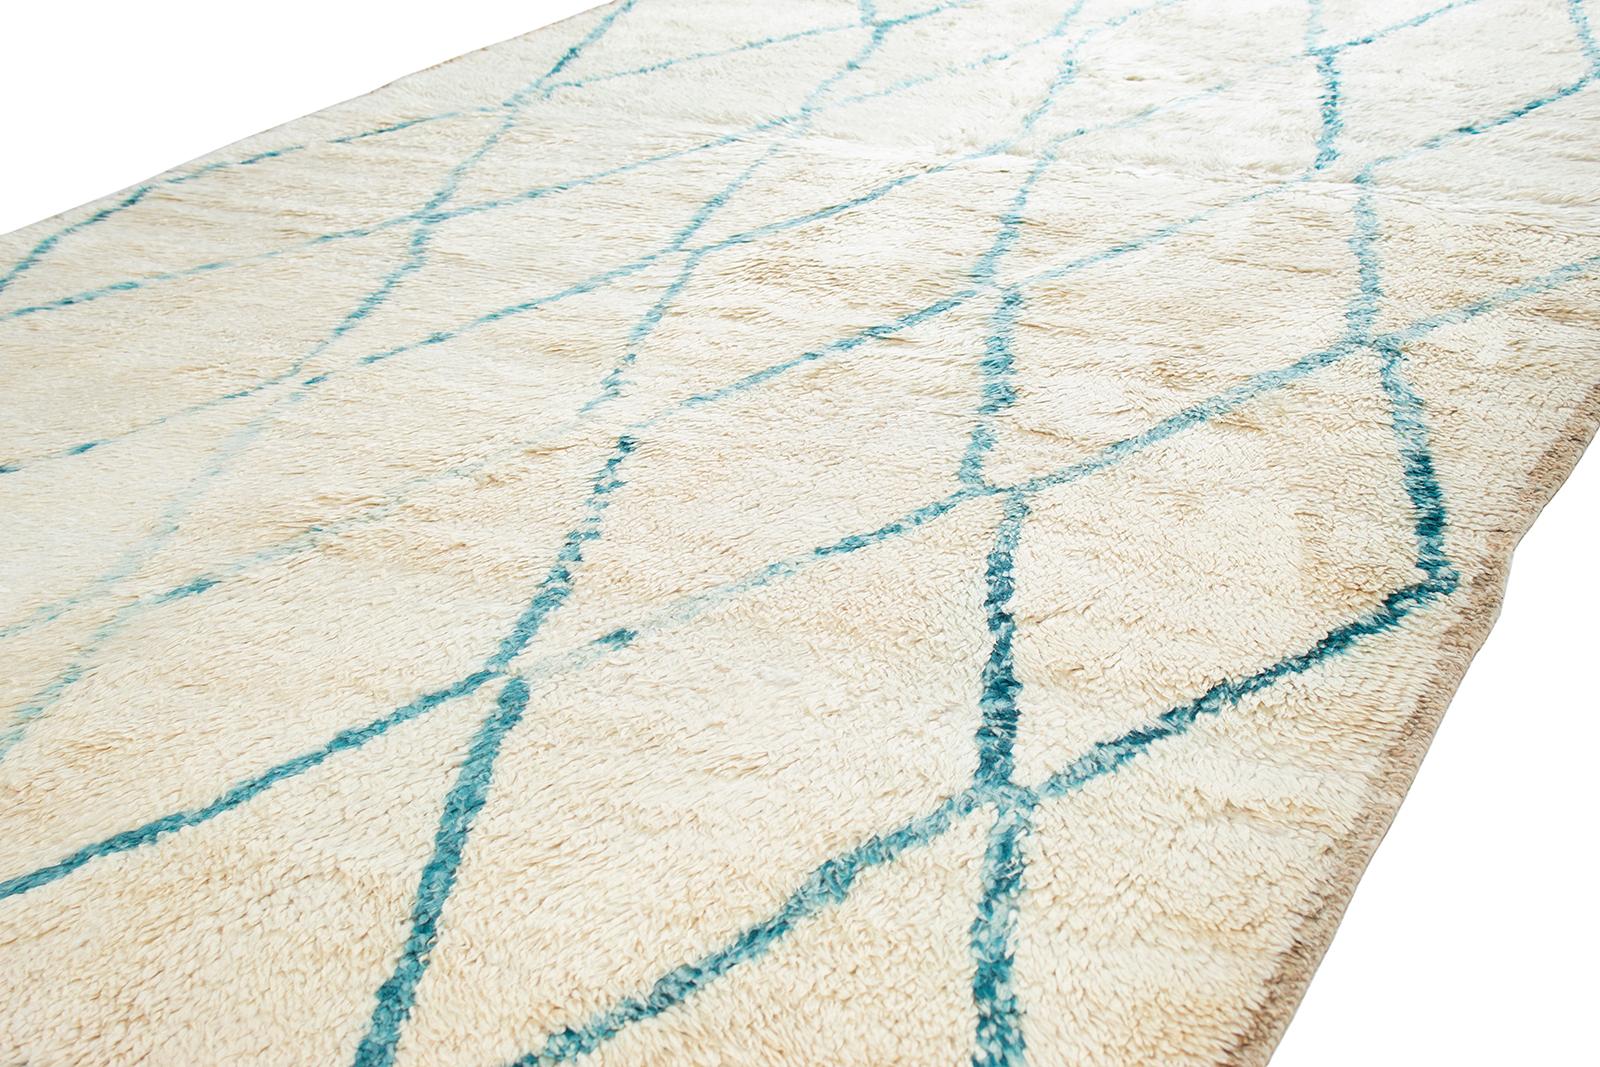 Our vintage Moroccan rugs are part of a skillfully curated collection of rare and unusual designs. They are made of all-natural dyes and 100% handspun wool from the Atlas Mountain region in North Africa. These rugs are all one-of-kind as they were